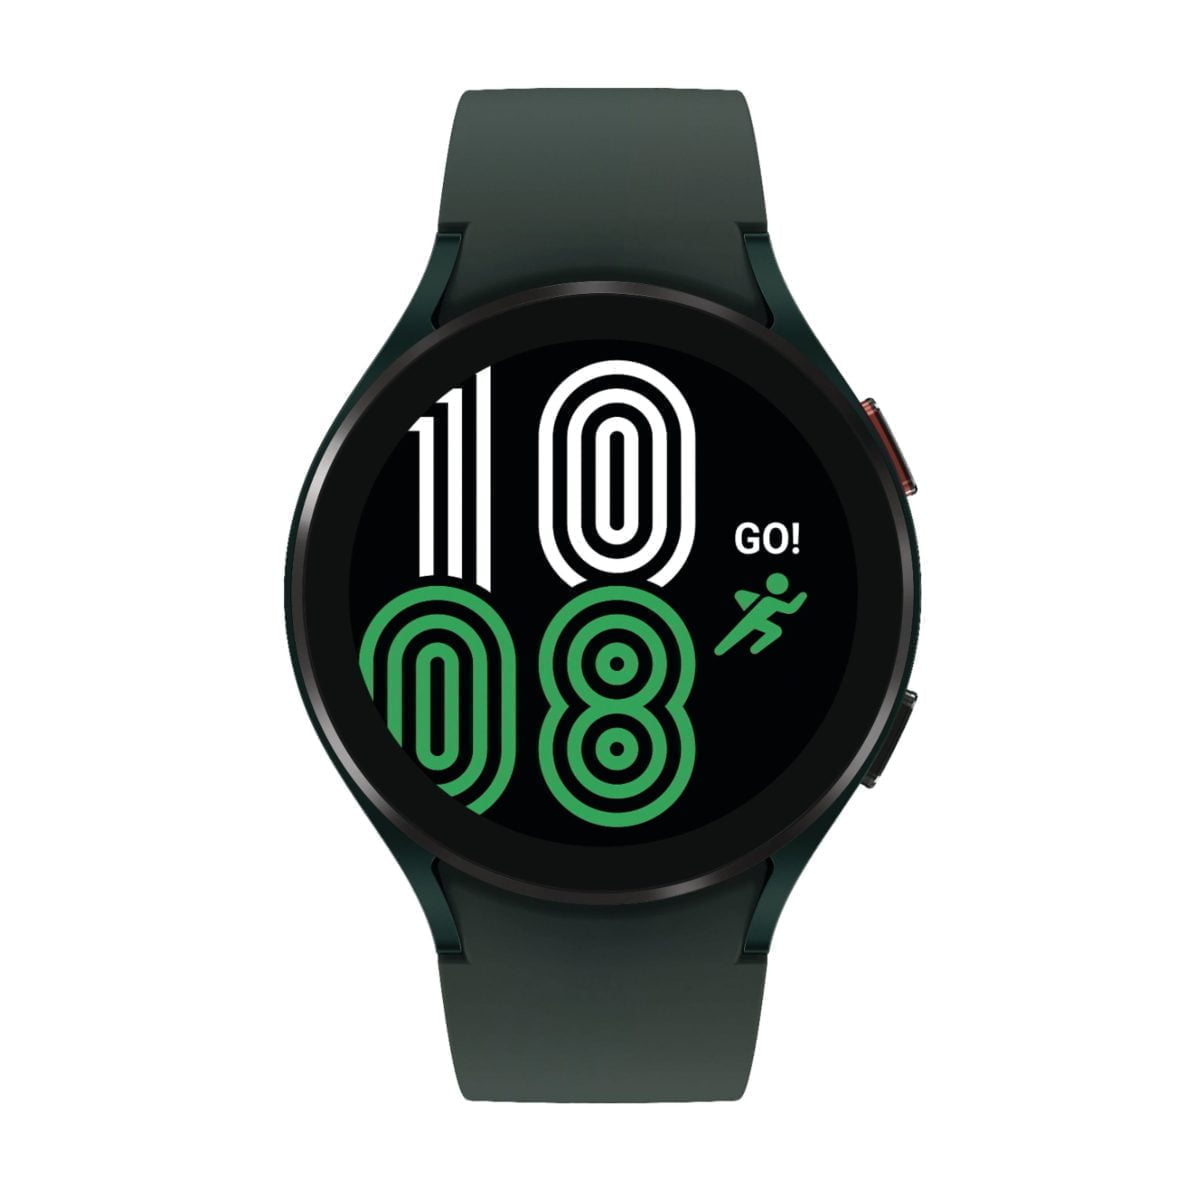 6464602 Sd Scaled Samsung &Amp;Lt;H1 Class=&Amp;Quot;Heading-5 V-Fw-Regular&Amp;Quot;&Amp;Gt;Samsung - Galaxy Watch4 Aluminum Smartwatch 44Mm Bt - Green &Amp;Lt;Span Class=&Amp;Quot;Product-Data-Label Body-Copy&Amp;Quot;&Amp;Gt;&Amp;Lt;Strong&Amp;Gt;Model&Amp;Lt;/Strong&Amp;Gt;: Sm-R870Nzgaxaa&Amp;Lt;/Span&Amp;Gt;&Amp;Lt;/H1&Amp;Gt; Https://Youtu.be/Plte1N8Pl90 &Amp;Lt;Div&Amp;Gt;Crush Workouts And All Your Health Goals With Samsung Galaxy Watch4. Be Your Best With The Watch That Knows You Best.&Amp;Lt;/Div&Amp;Gt; &Amp;Lt;Div&Amp;Gt;We All Want To Know More About Ourselves, So We Can Be The Best Version Of Ourselves. That'S Why We Engineered The All-New Galaxy Watch4 Classic To Be The Stylish Companion To Your Journey Towards A Healthier You Some Looks Are Timeless, Like The Galaxy Watch4 Classic’s Rotating Bezel And Vivid Screen. The Refined Design Adds Sophistication To Your Wrist For An Elevated Style. Its High-End Stainless Steel Materials Shows Off Its Powerful And Intuitive Functionality&Amp;Lt;/Div&Amp;Gt; Samsung Watch 4 Samsung Galaxy Watch 4 Aluminum Smartwatch 44Mm Bt - Green